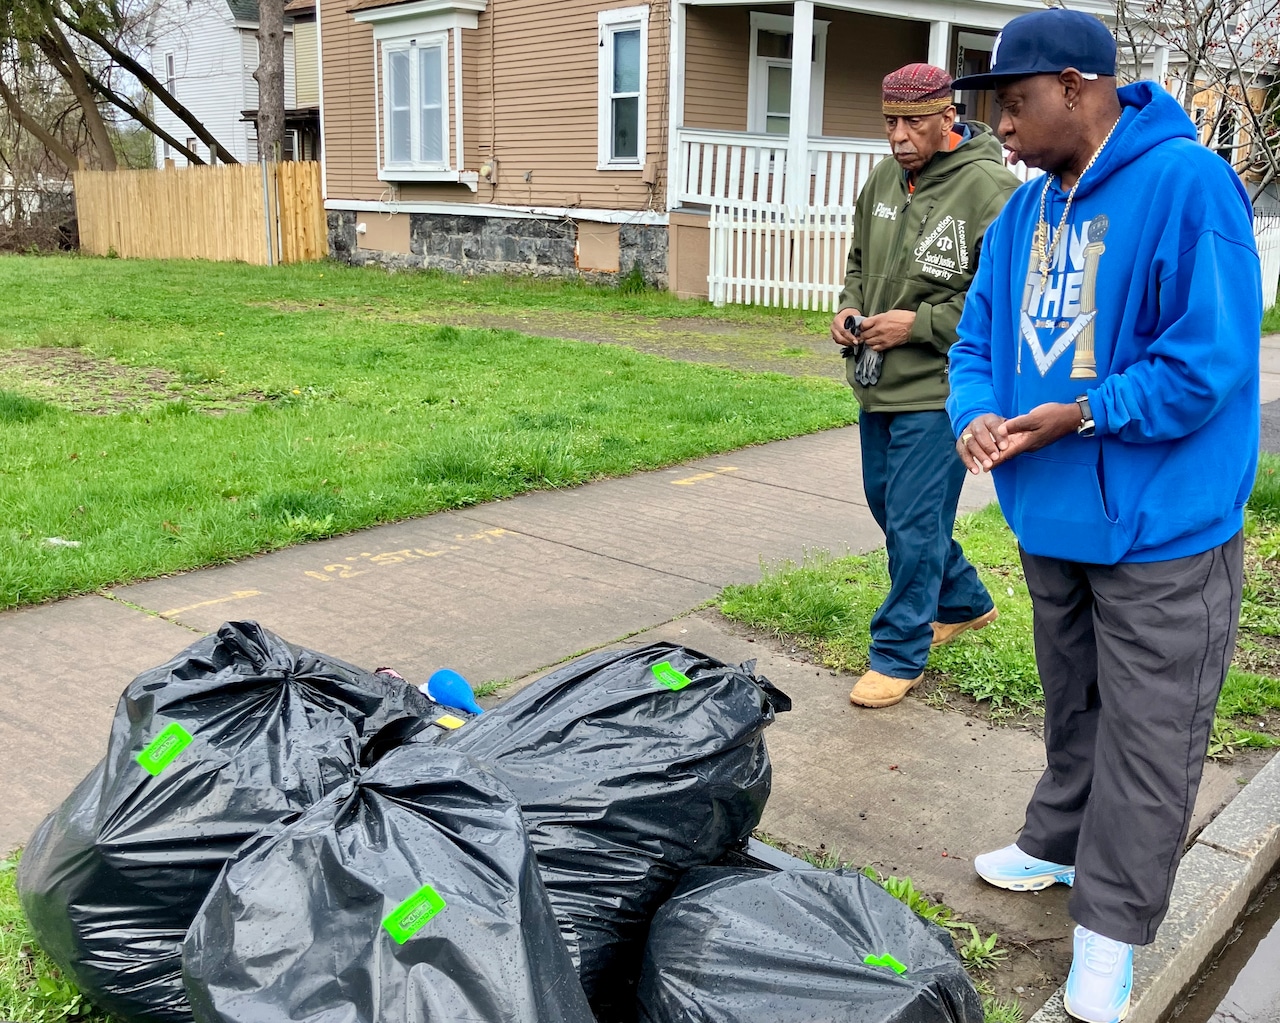 Success of Earth Day litter cleanup shows power of community (Your Letters) [Video]